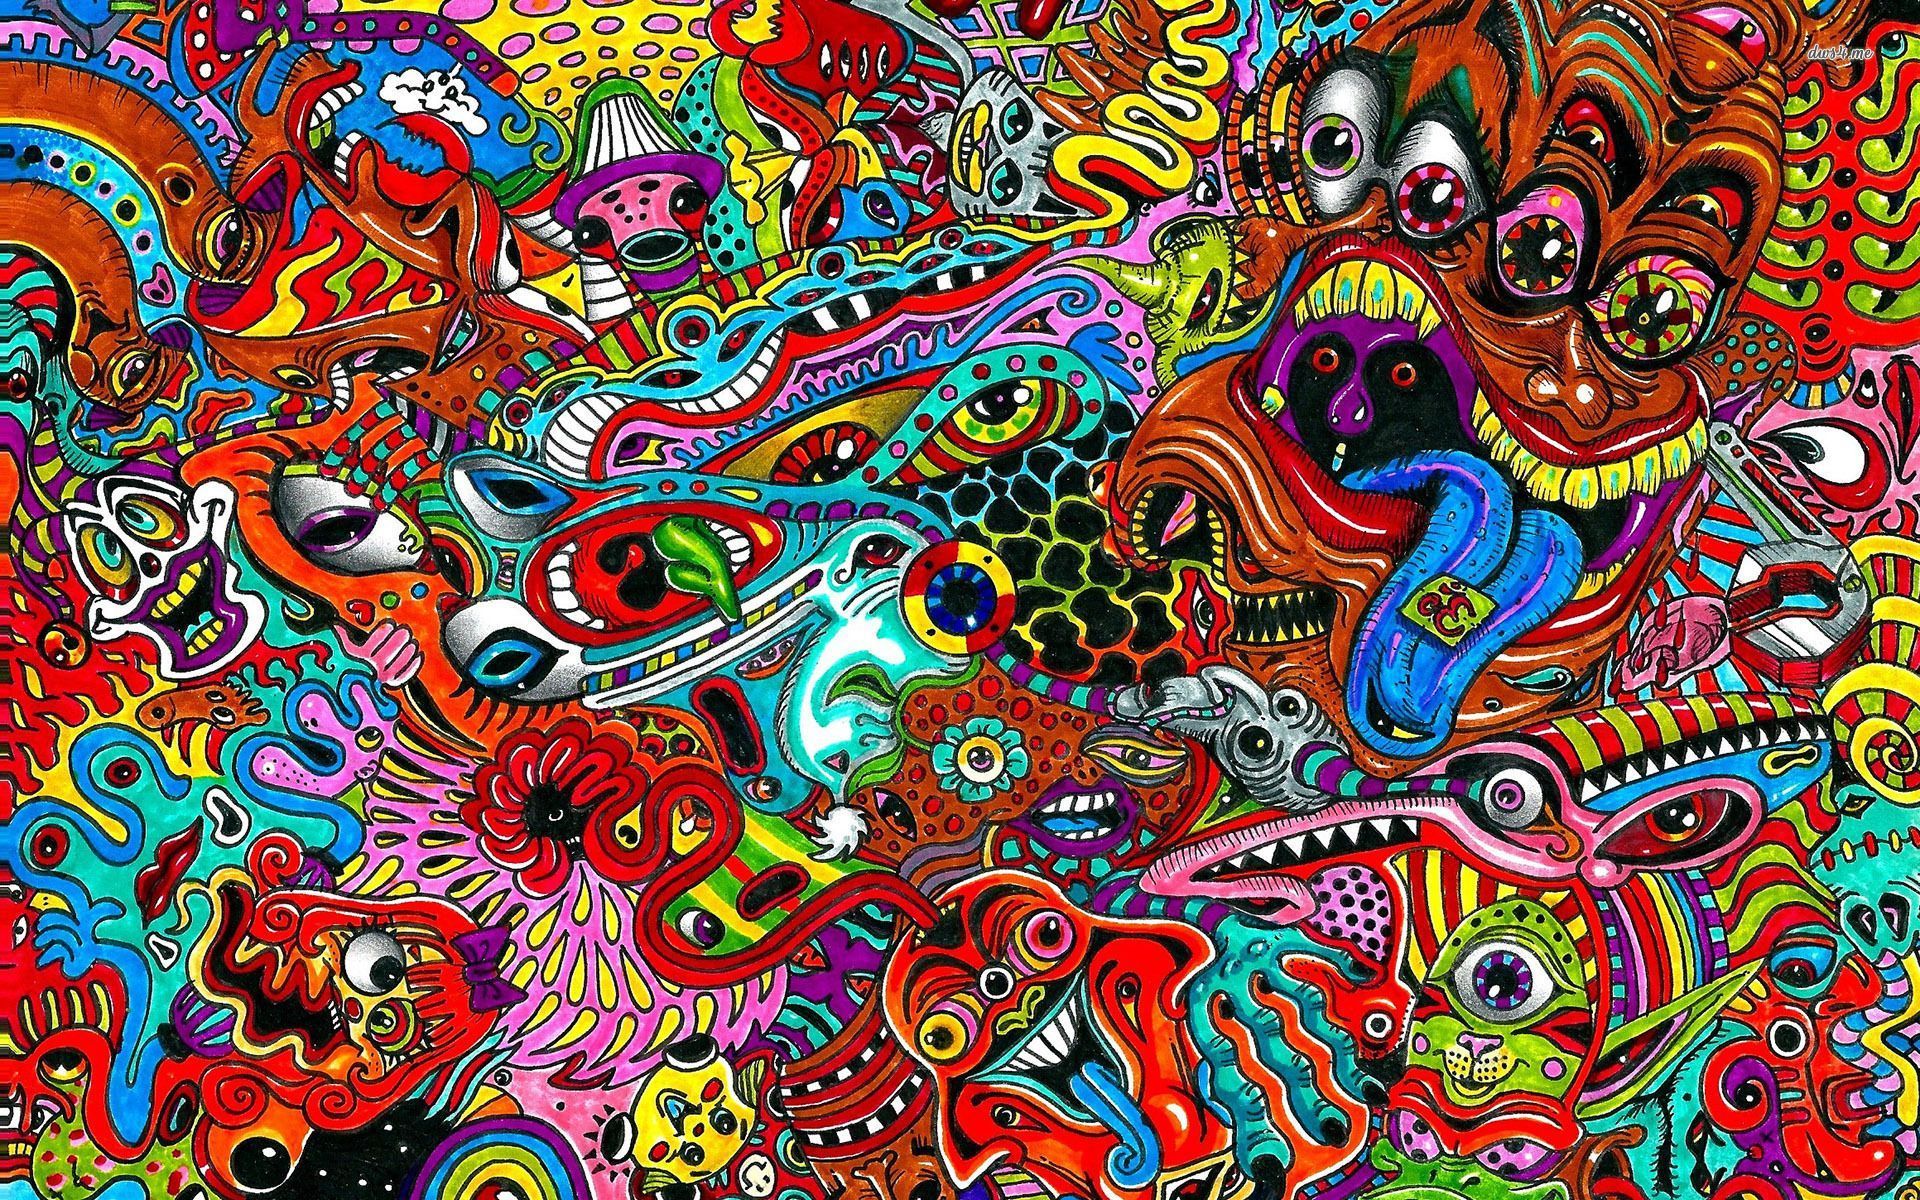 Psychedelic wallpaper - Artistic wallpapers - #15999